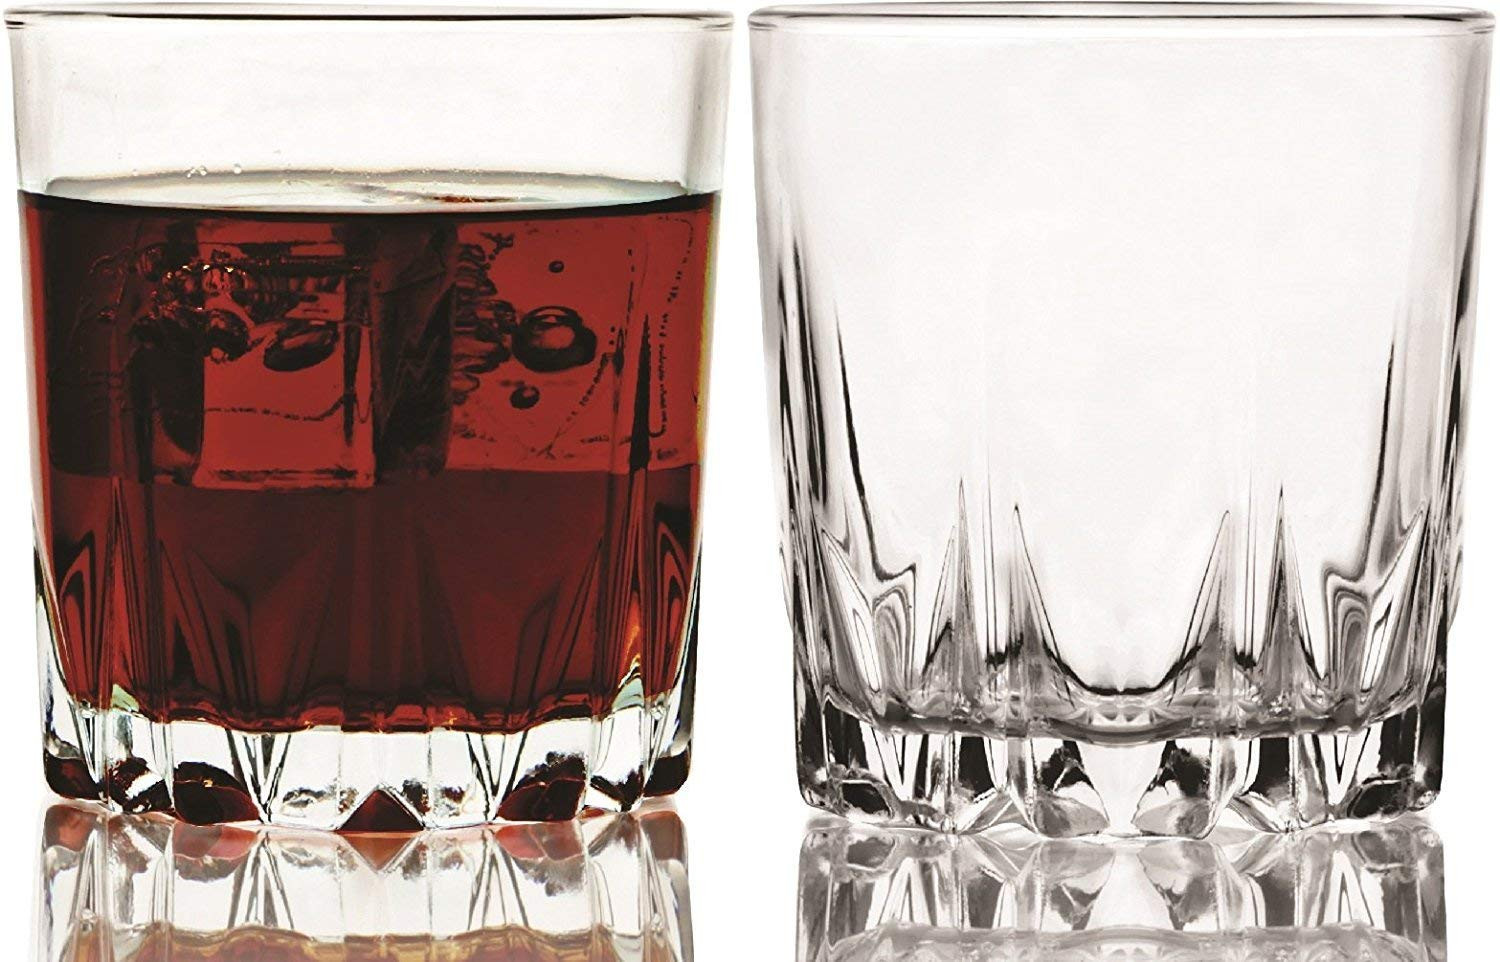 22 Fantastic Footed Glass Hurricane Vase 2024 free download footed glass hurricane vase of amazon com circleware 10187 cg society ambition double old inside amazon com circleware 10187 cg society ambition double old fashioned whiskey drinking glasses